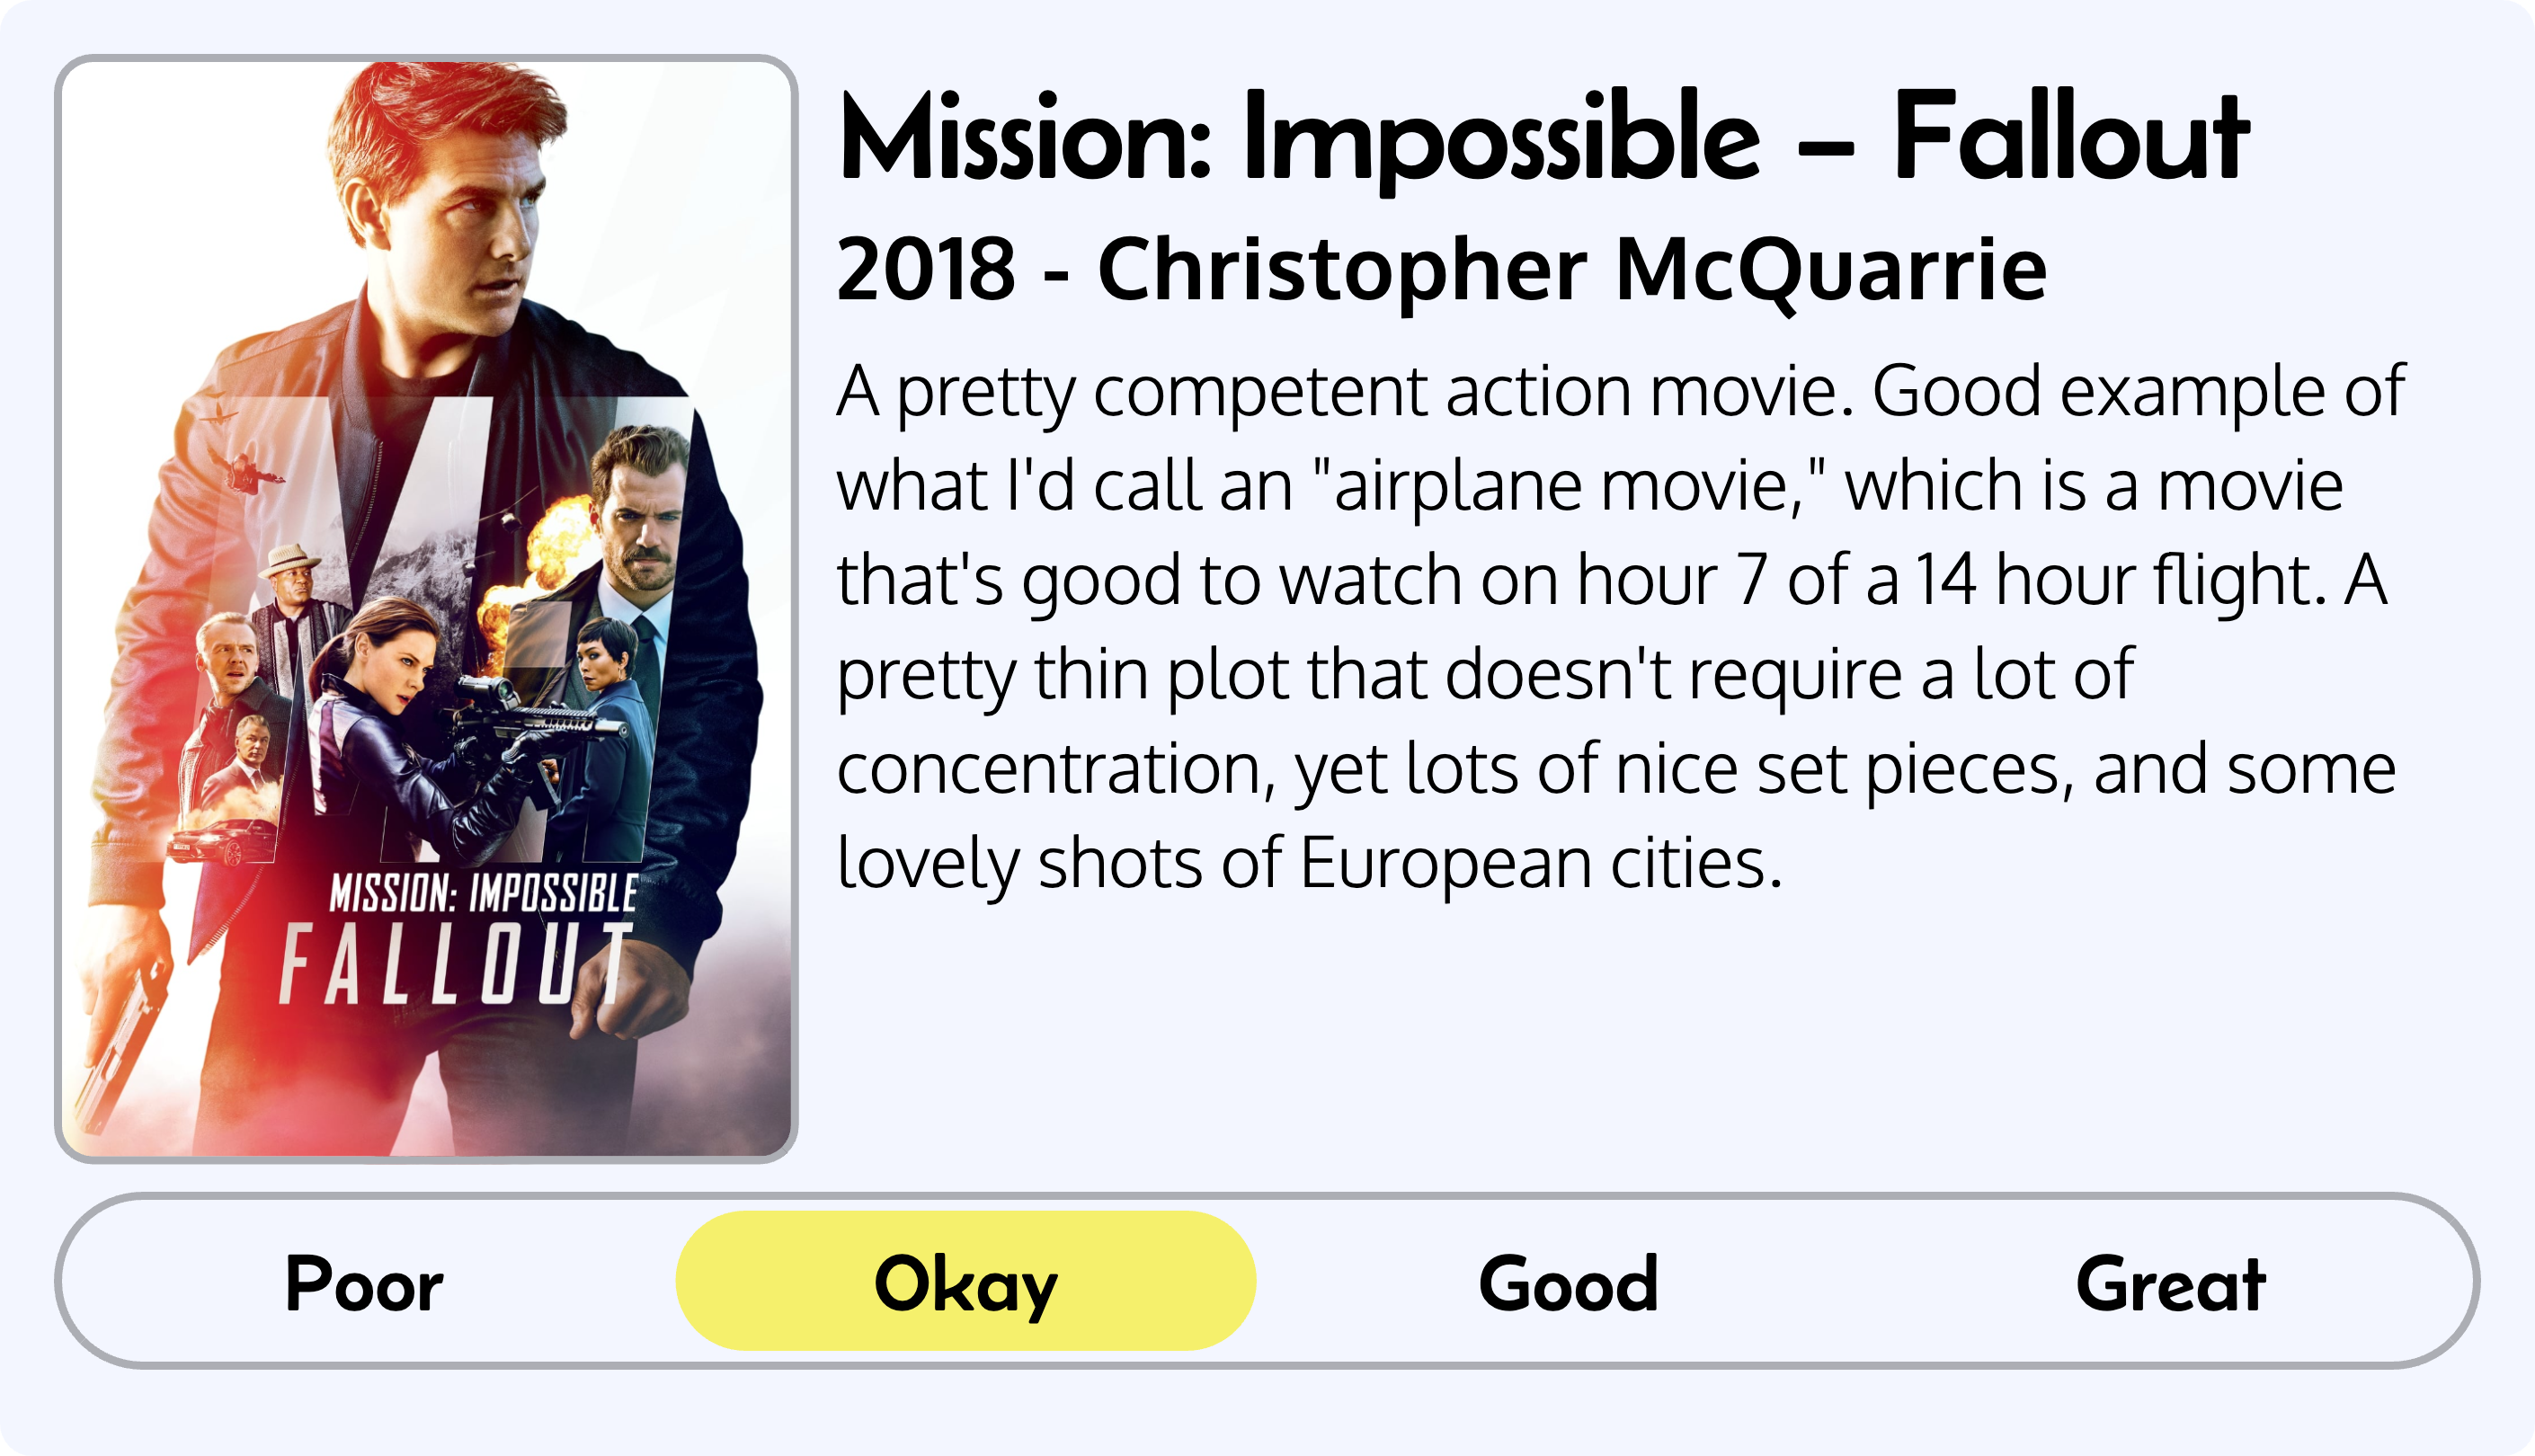 Quick review of Mission: Impossible – Fallout, 2018, by Christopher McQuarrie. Review reads as follows: A pretty competent action movie. Good example of what I'd call an 'airplane movie,' which is a movie that's good to watch on hour 7 of a 14 hour flight. A pretty thin plot that doesn't require a lot of concentration, yet lots of nice set pieces, and some lovely shots of European cities. Overall rating: okay